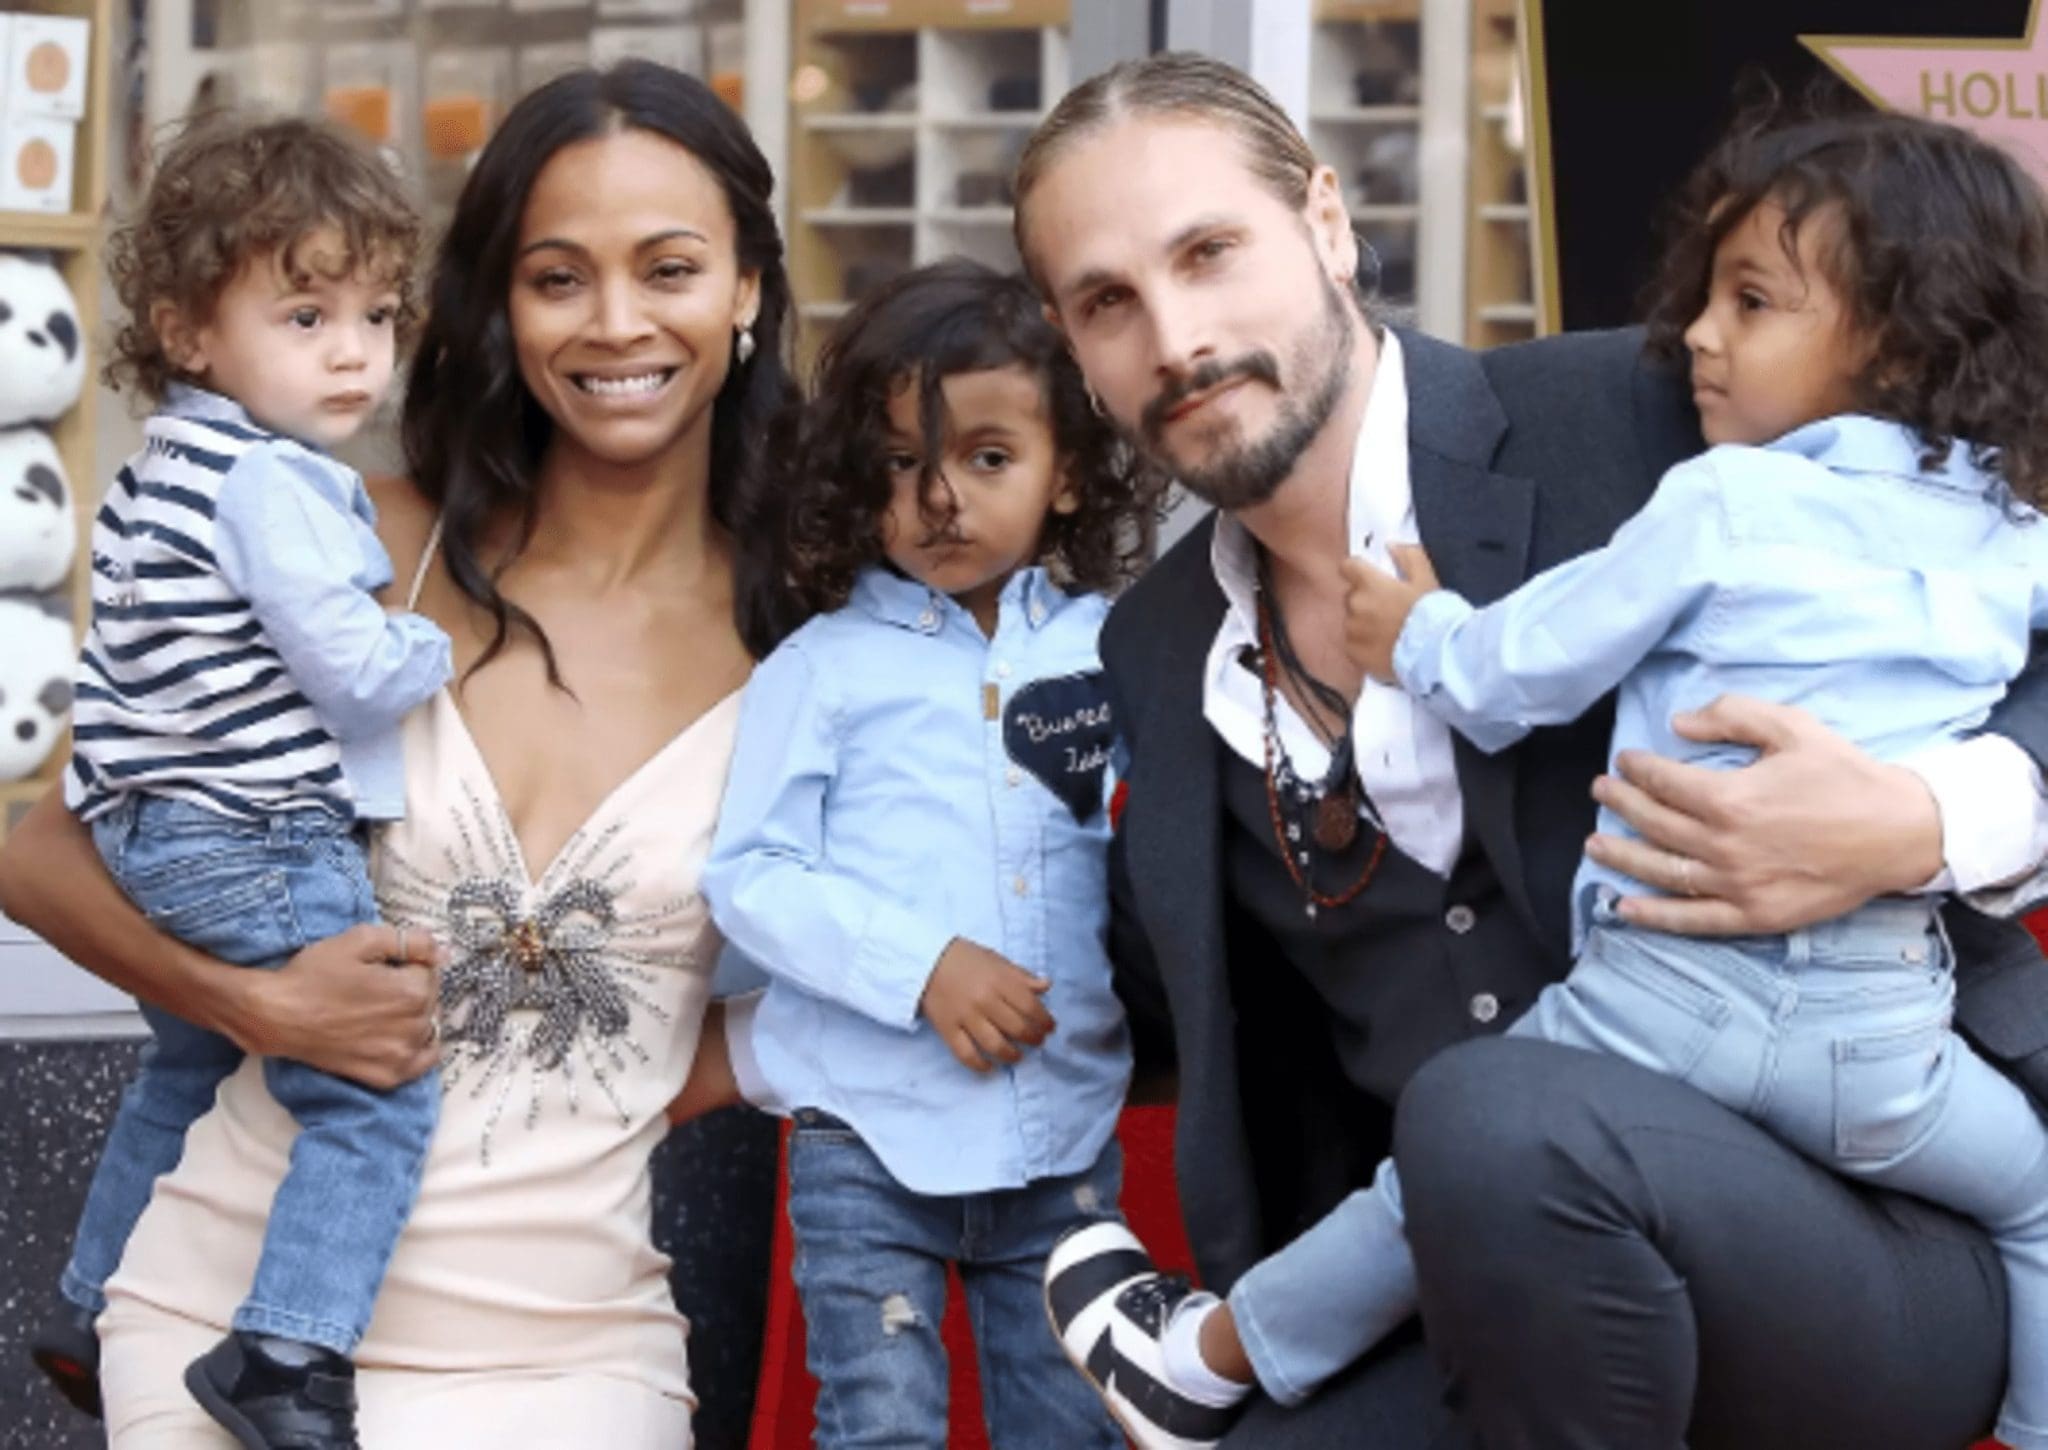 What Zoe Saldana Discovered About Herself While Writing Her Very Brave, Ground-Up International Love Story